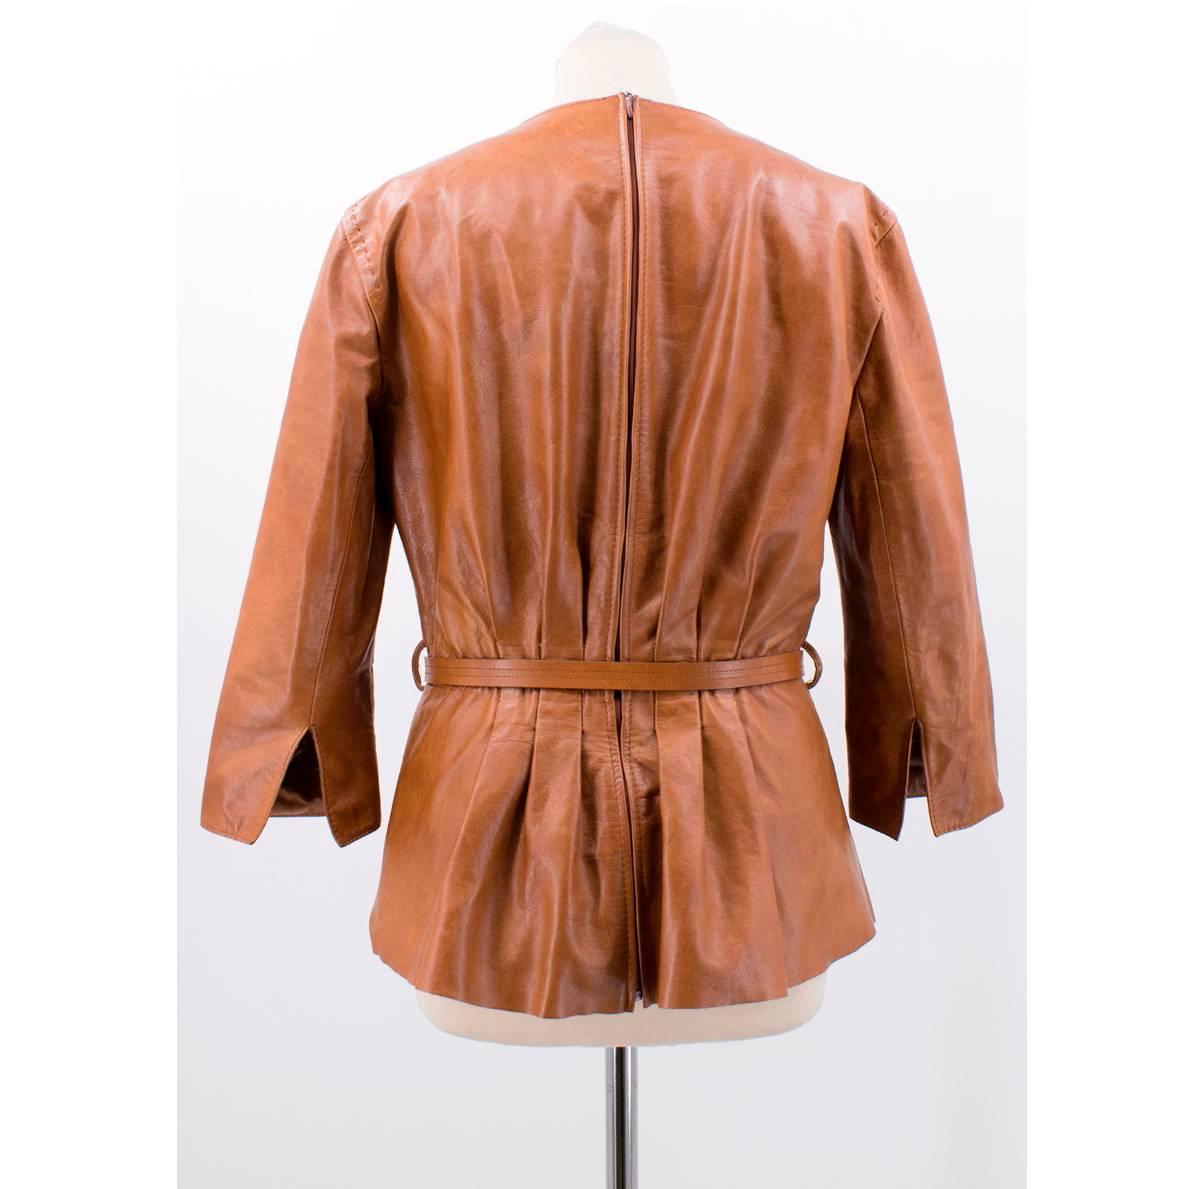 Gianfranco Ferre Leather Top For Sale 4